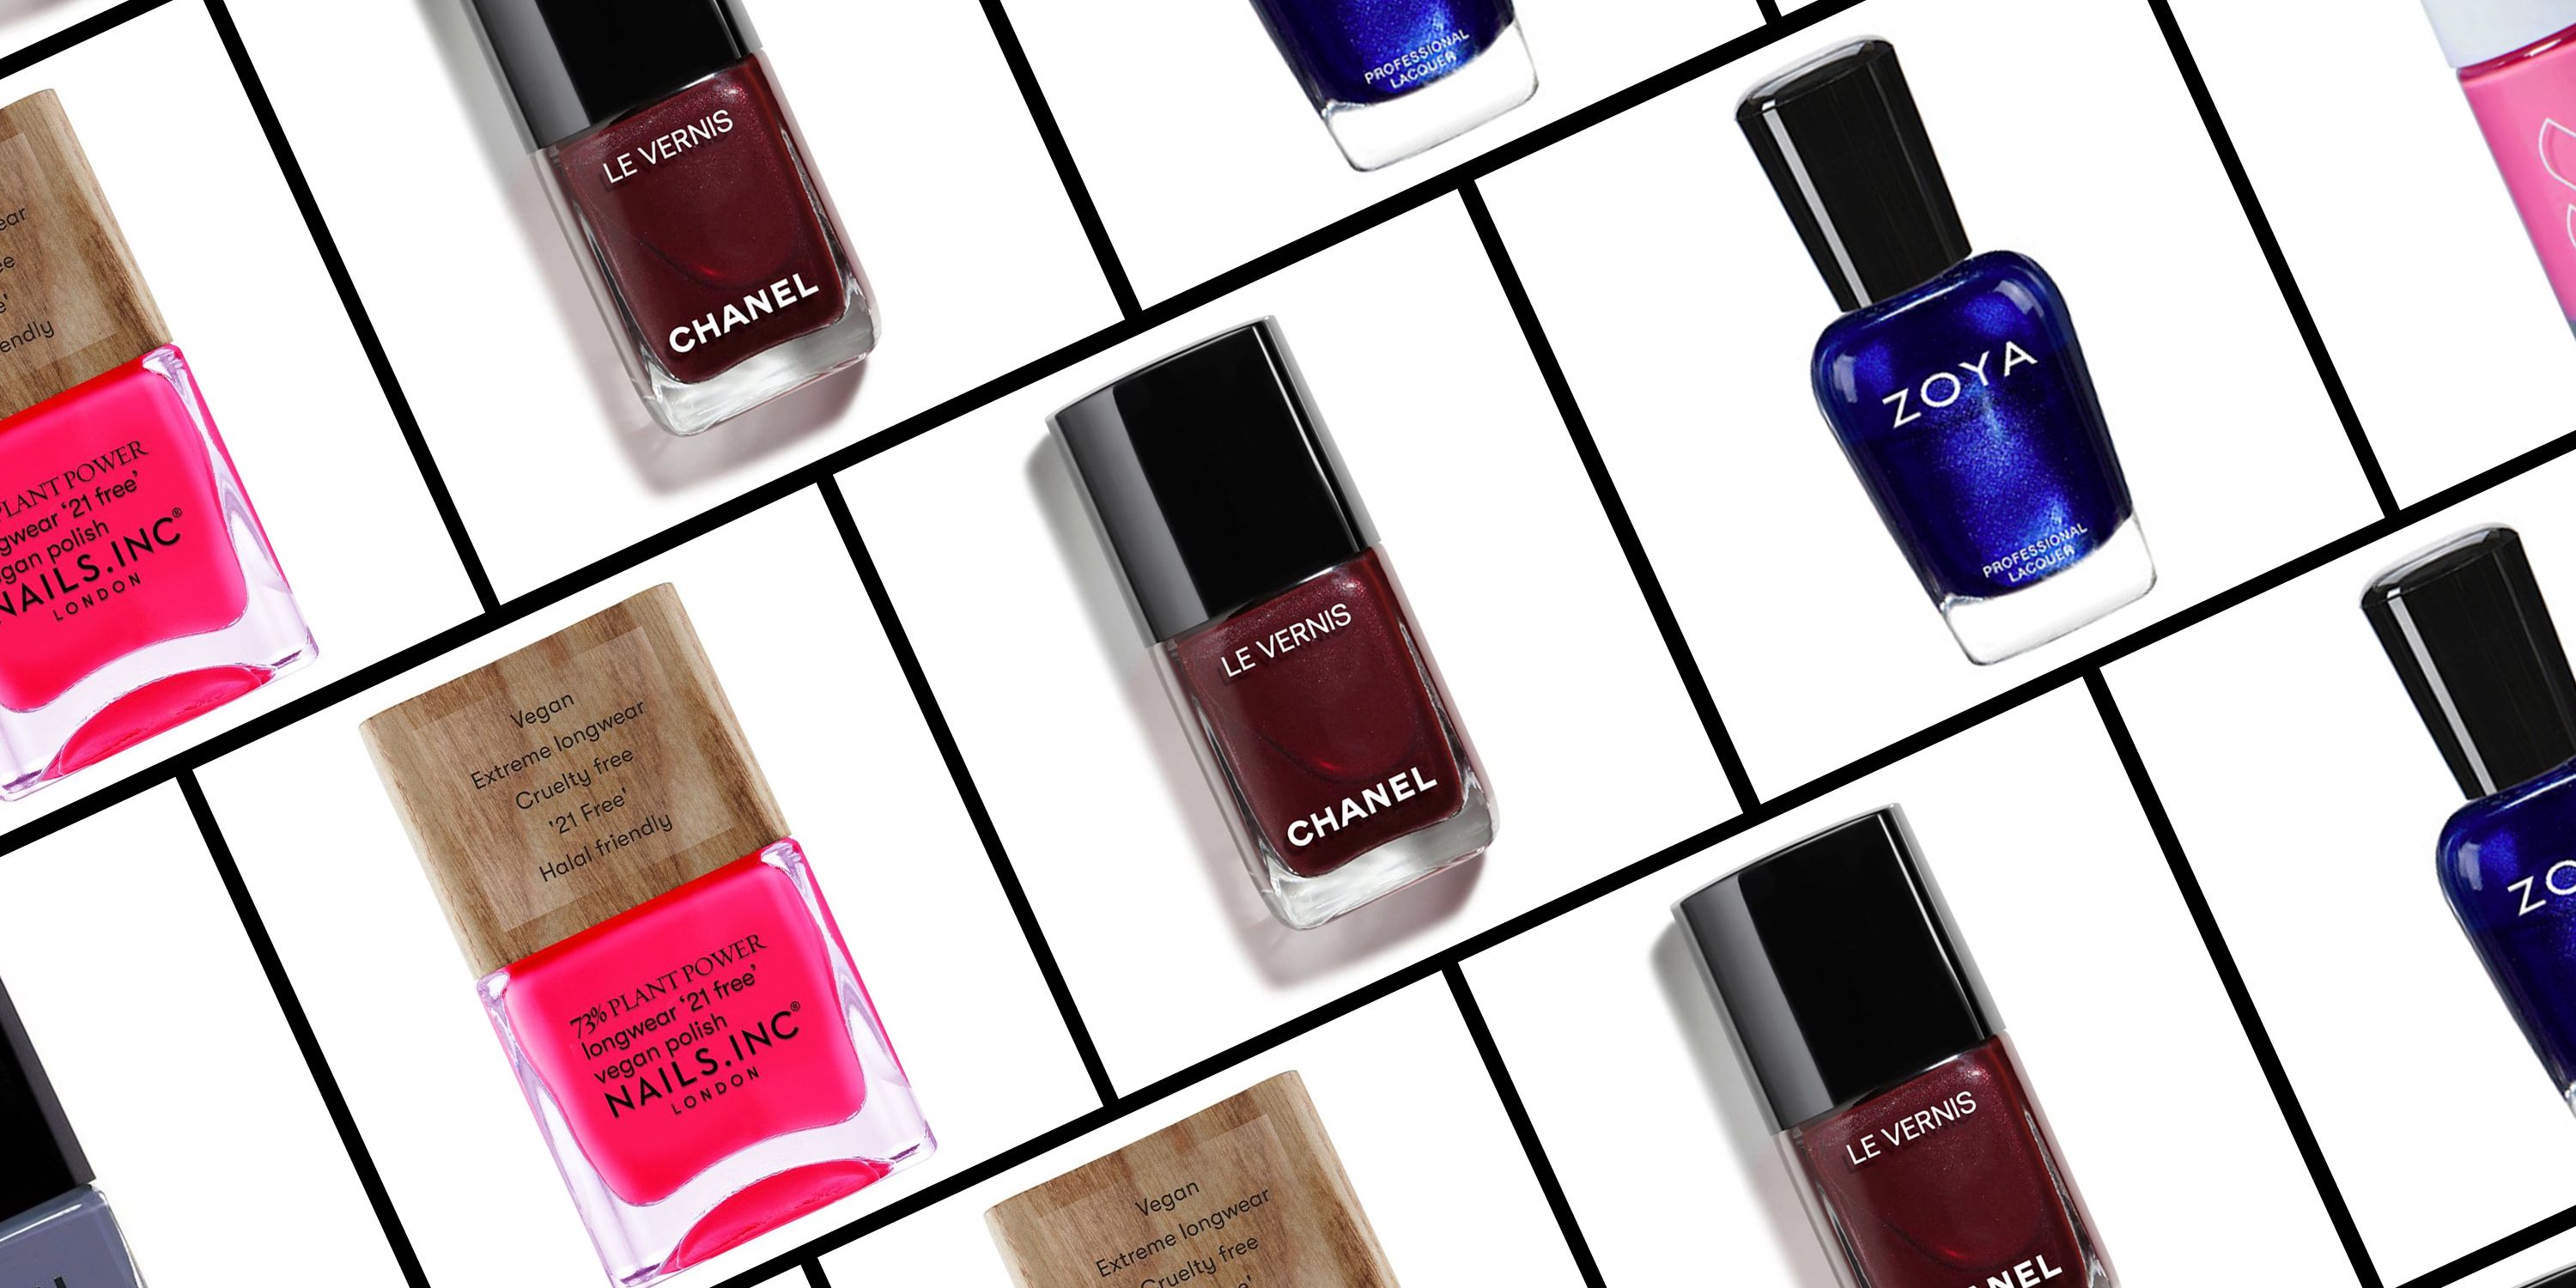 8. "The Best Nail Polish Brands for Women Over 60" - wide 6